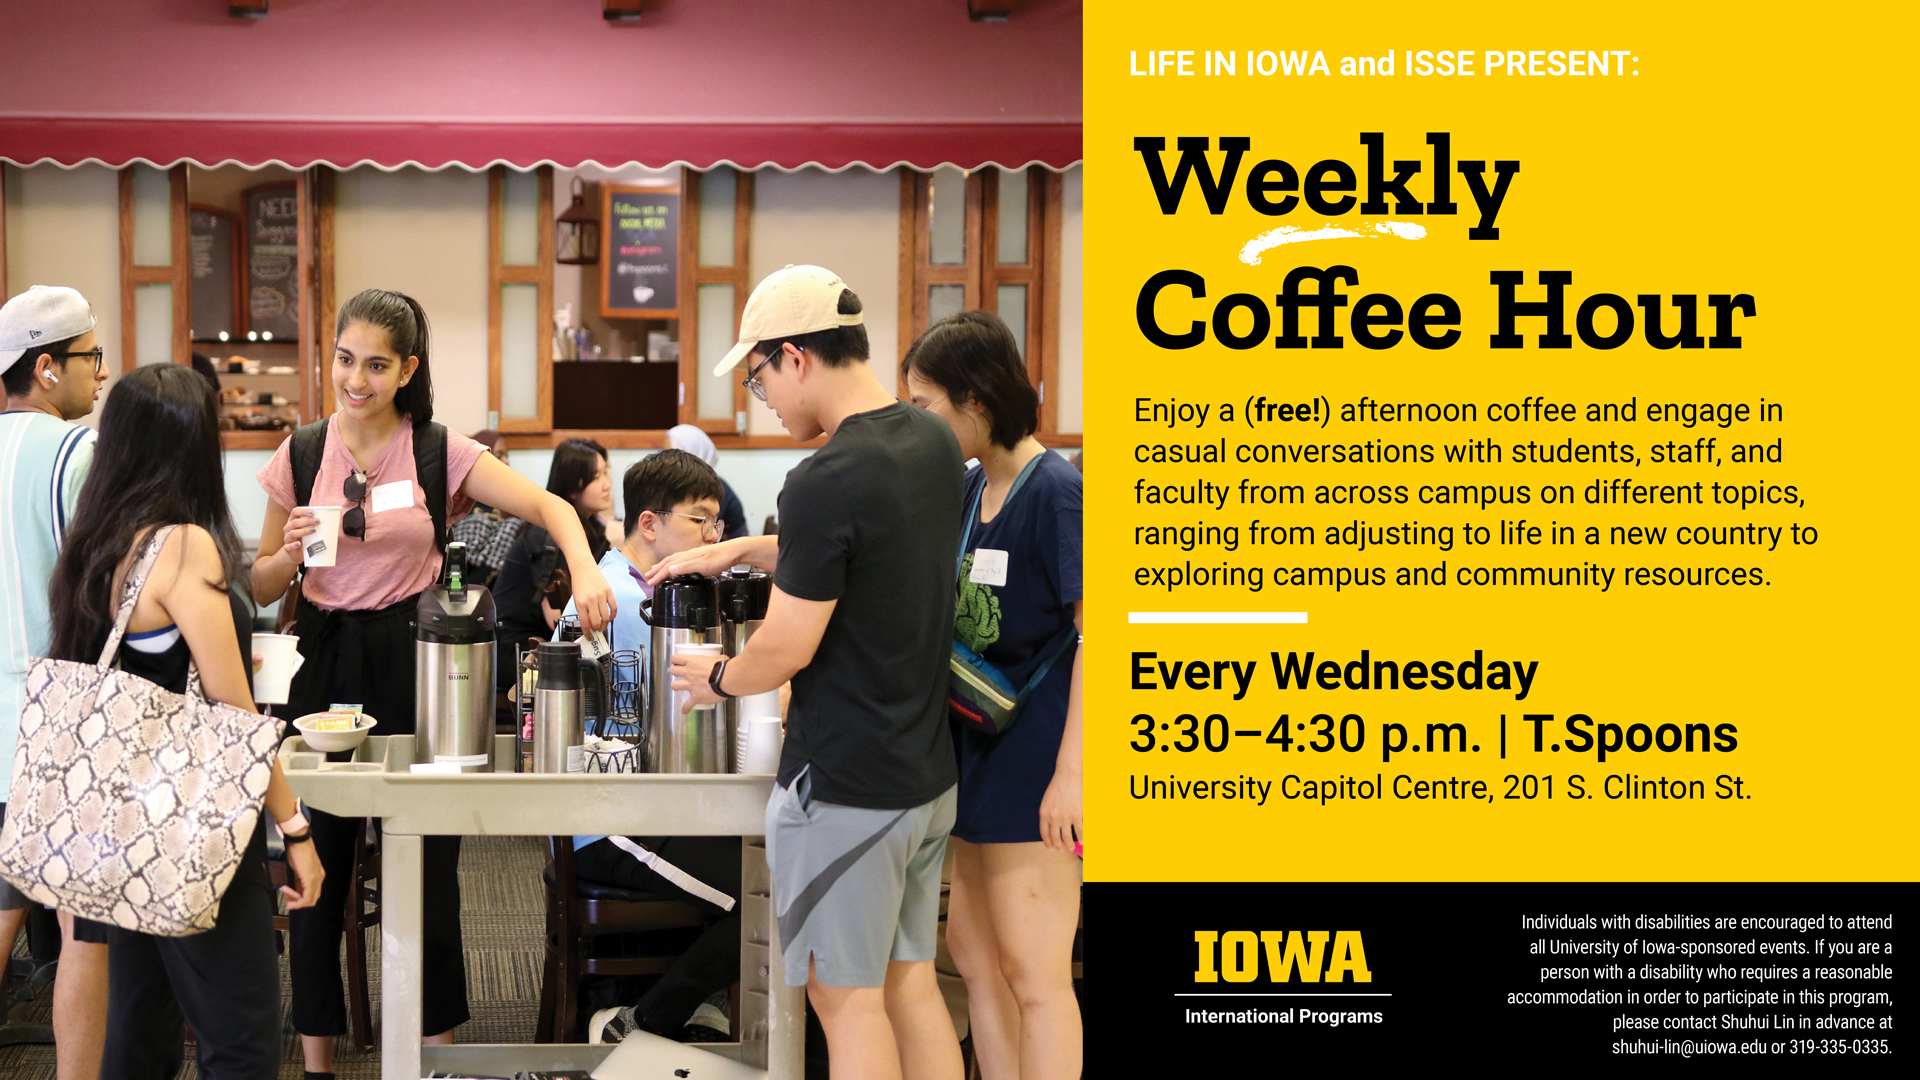 Weekly Coffee Hour. Enjoy a free coffee every Wednesday from 3:30-4:30pm at the University Capital Centre